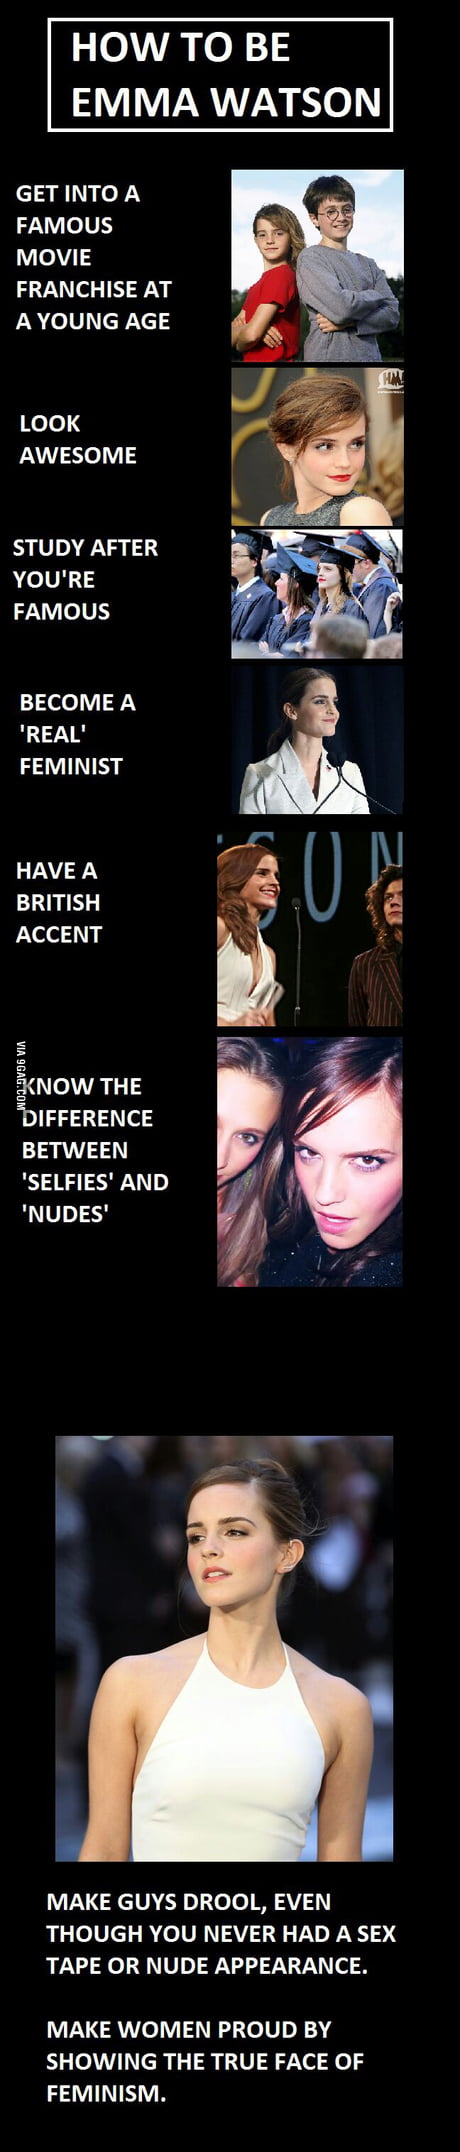 Emma Watson Bondage Captions Porn - How to be Emma Watson. This is perfect. - 9GAG